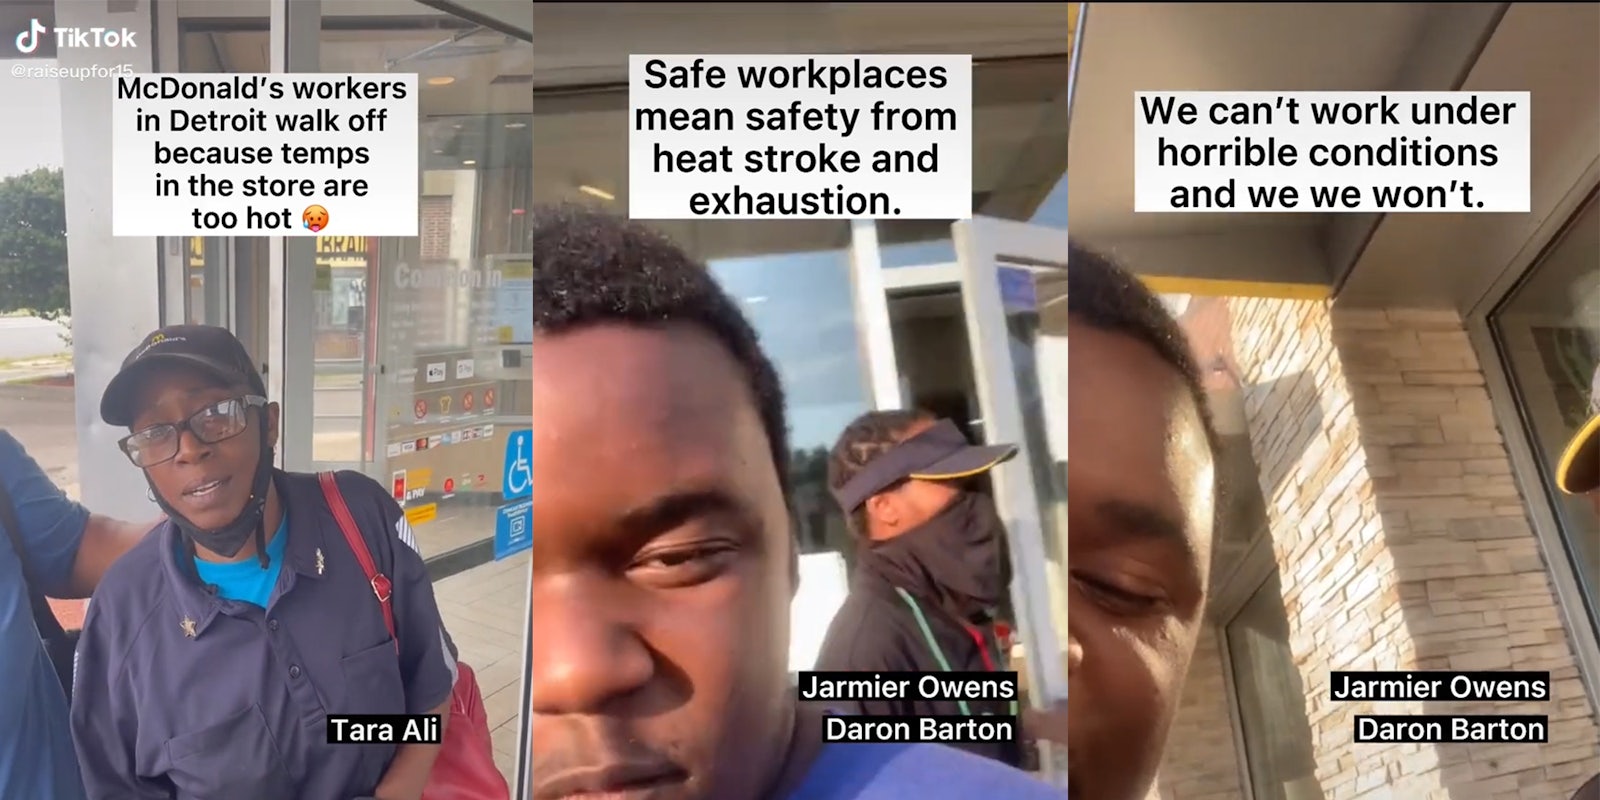 Woman leaving McDonald's with caption 'McDonald's workers in Detroit walk off because temps in the store are too hot' (l) Two men leaving store with caption 'Safe workplaces mean safety from heat stroke and exhaustion.' (c) man outside McDonald's with caption 'We can't work under horrible conditions and we we won't'. (r)